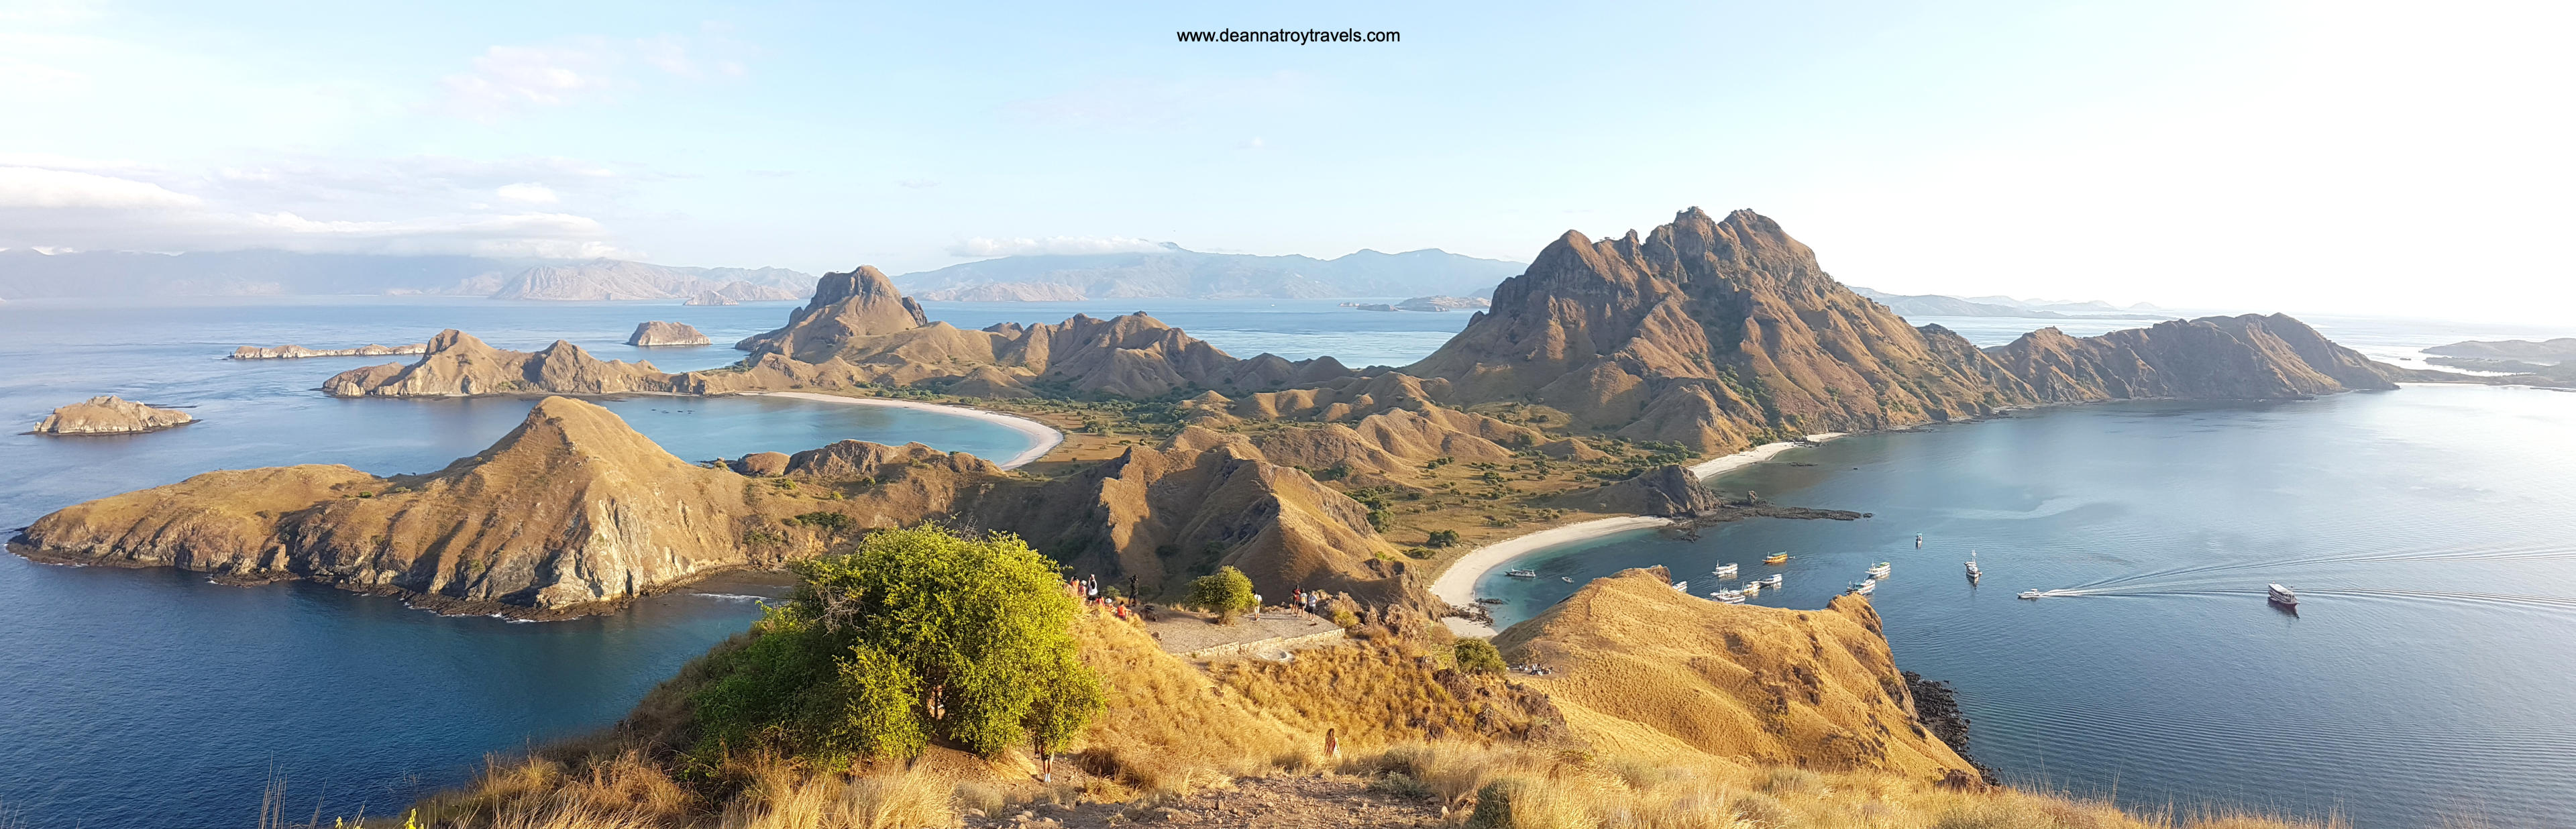 A full panorama of the stunning mountains on Padar Island in Indonesia.